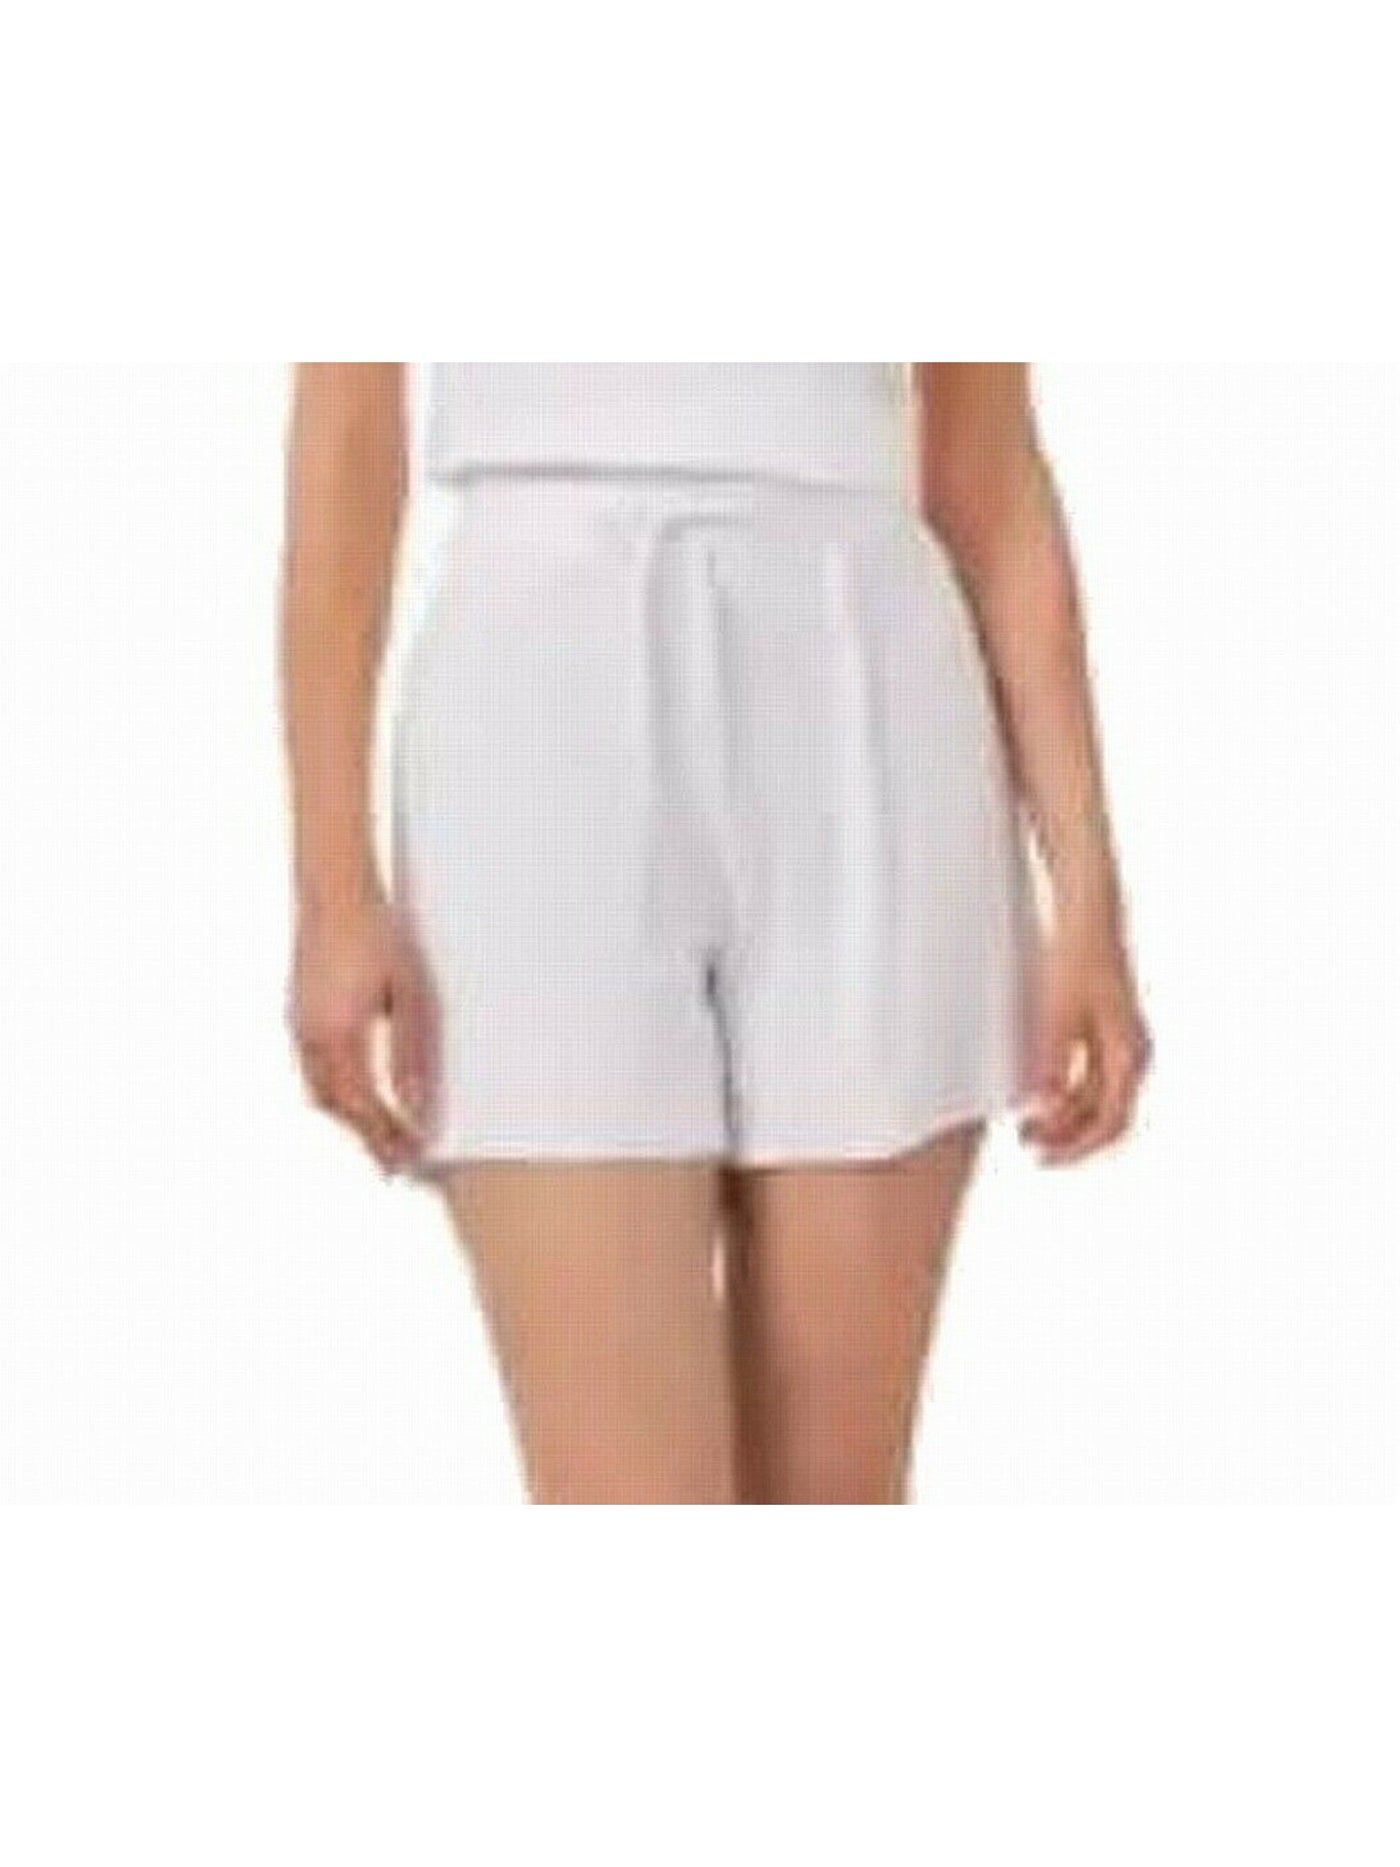 RILEY&RAE Womens White Pocketed Tie Two Front Pockets,  Relaxed Fit. Shorts L